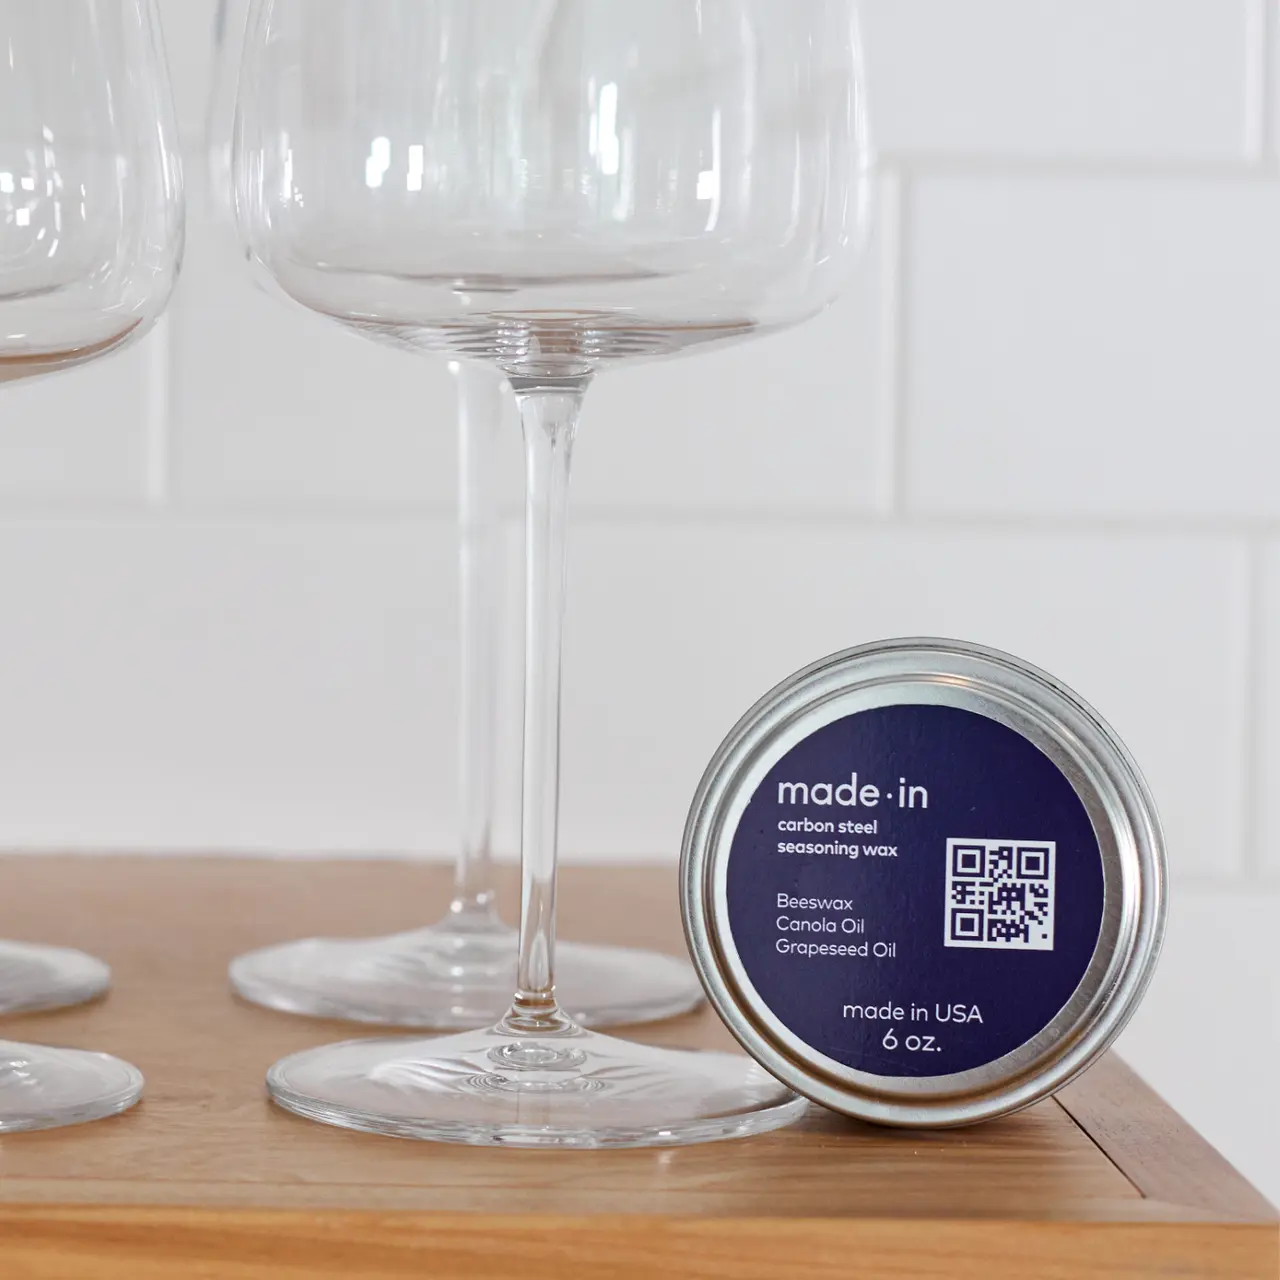 A tin of "made-in" brand carbon steel seasoning wax sits on a wooden surface in front of wine glasses, suggesting a kitchen setting.